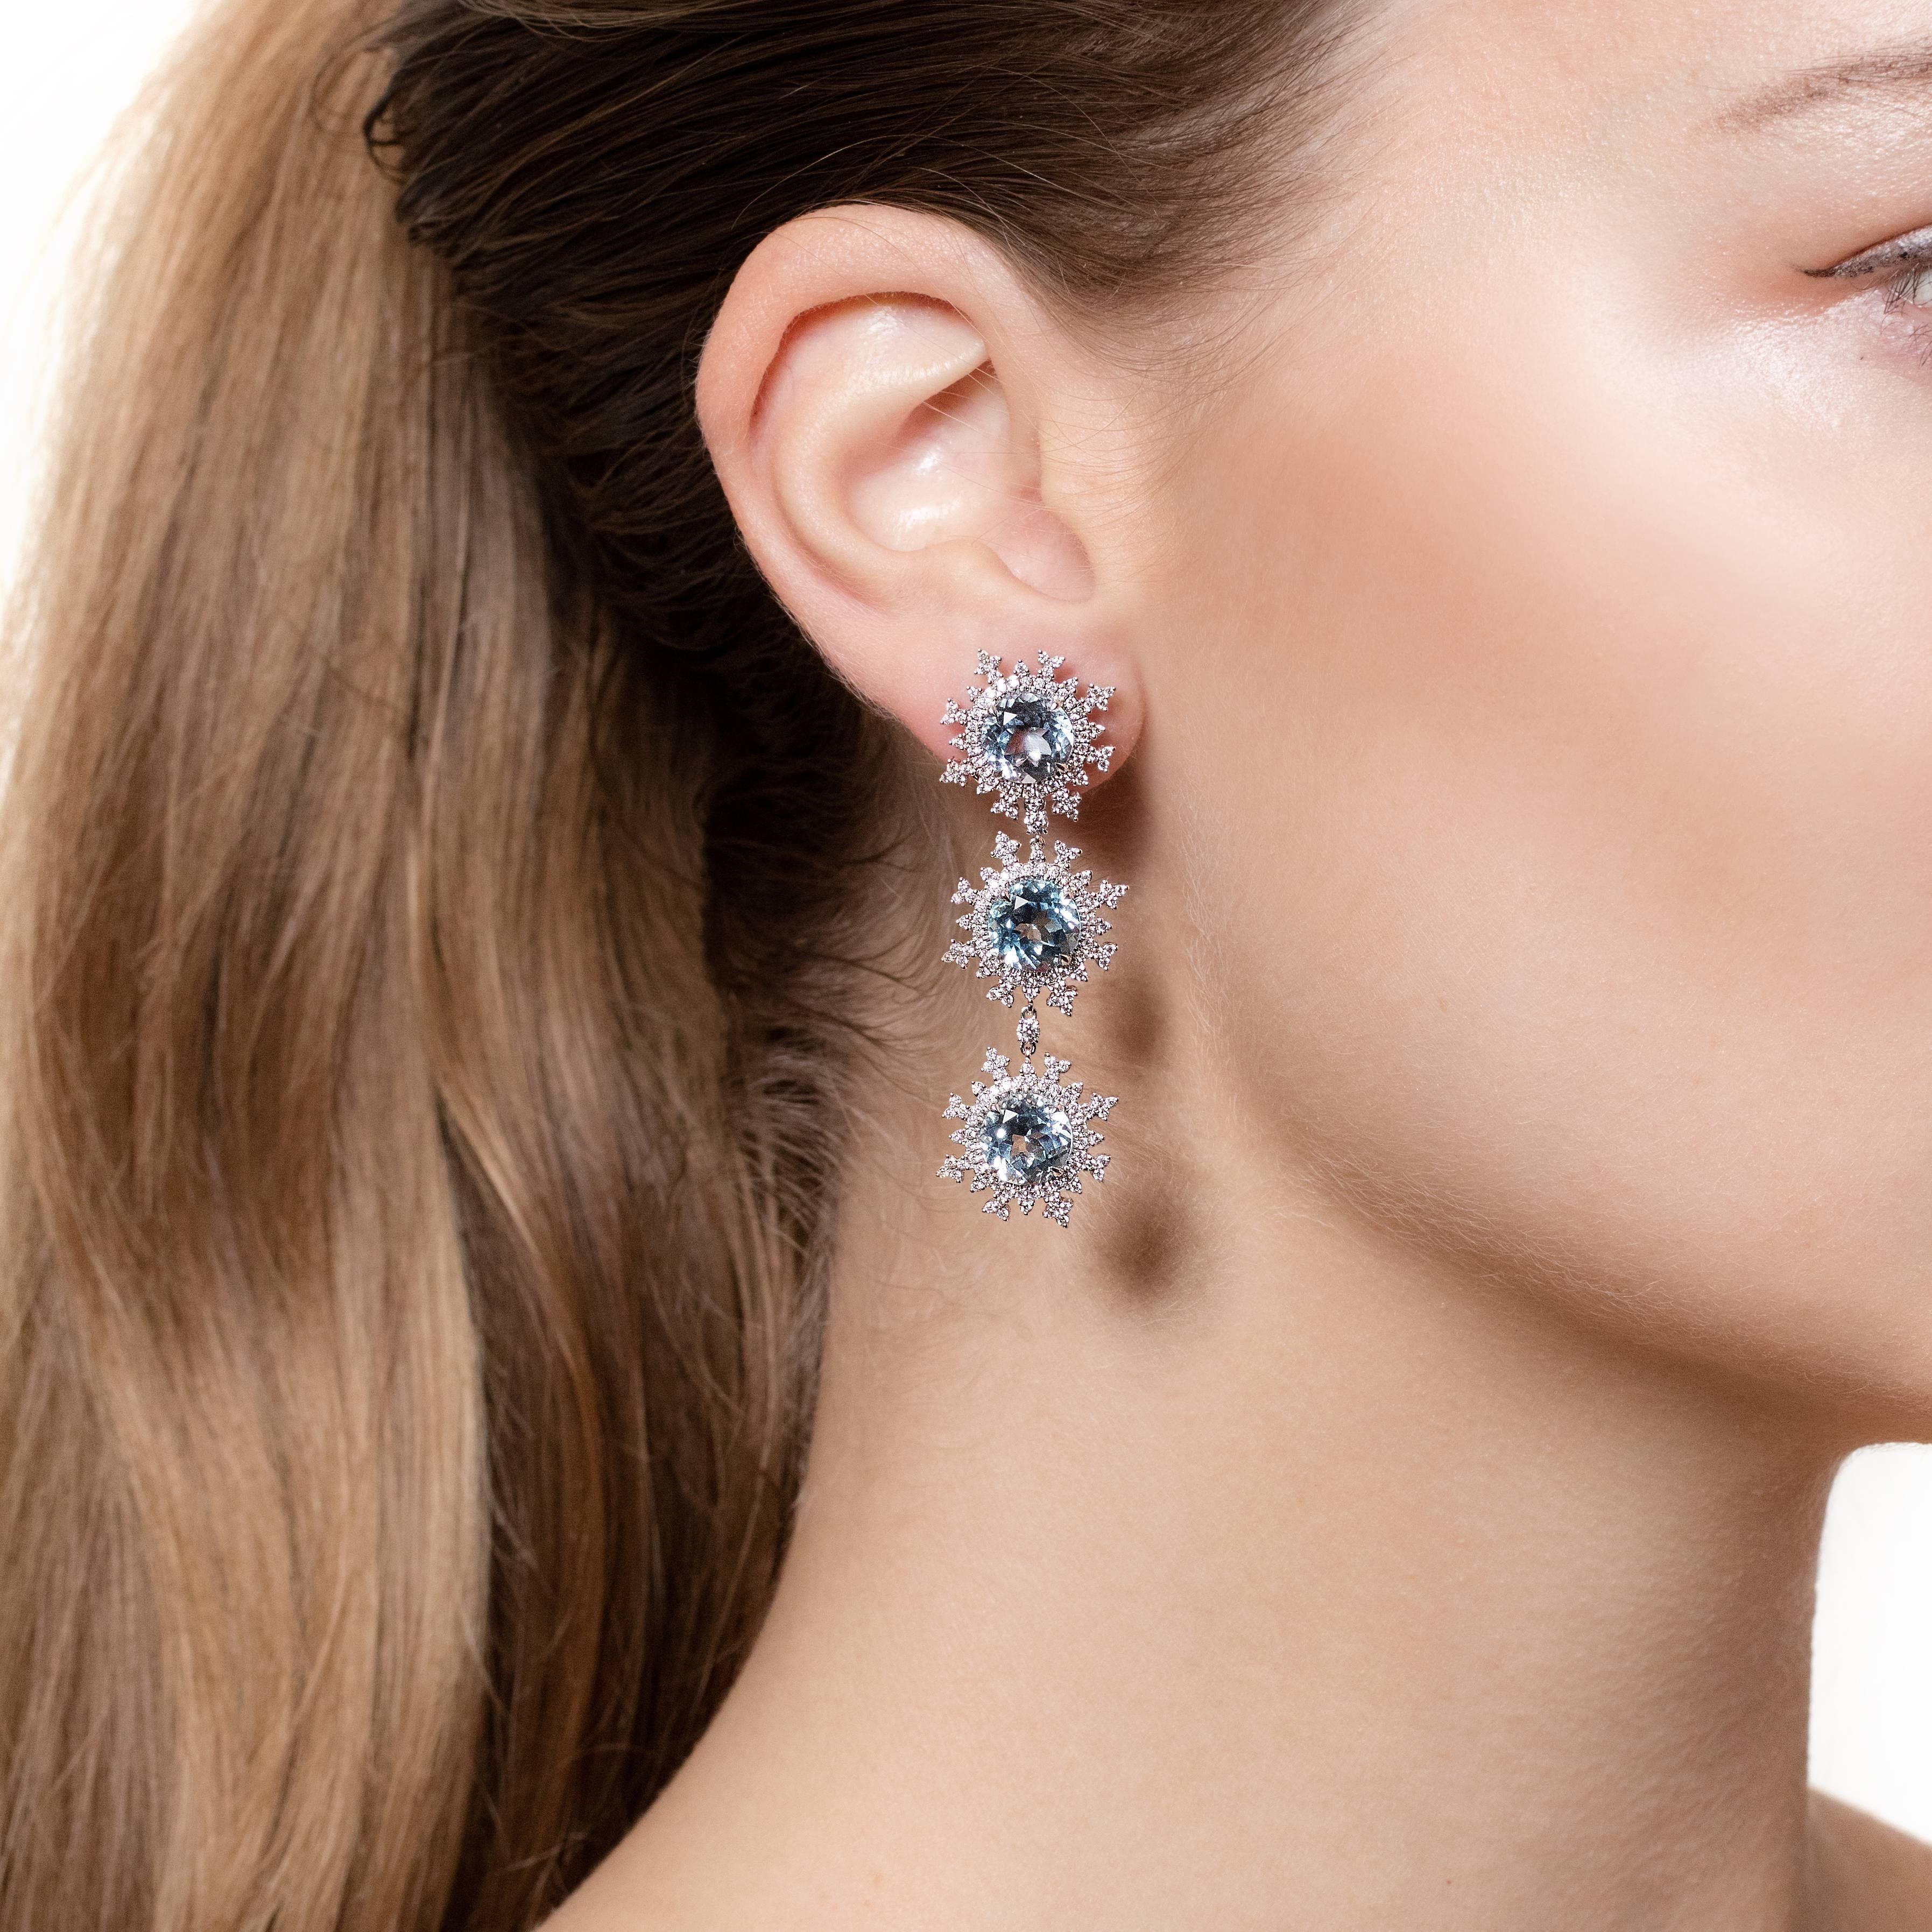 18ct. white gold (12.0g), 6 sky blue topaz 13.95ct., 388 white round-cut diamonds 1.52ct.

A stunning pair of long detachable flake earrings that are made from 18ct. white gold with 3 light blue topaz stones on each earring that are surrounded by